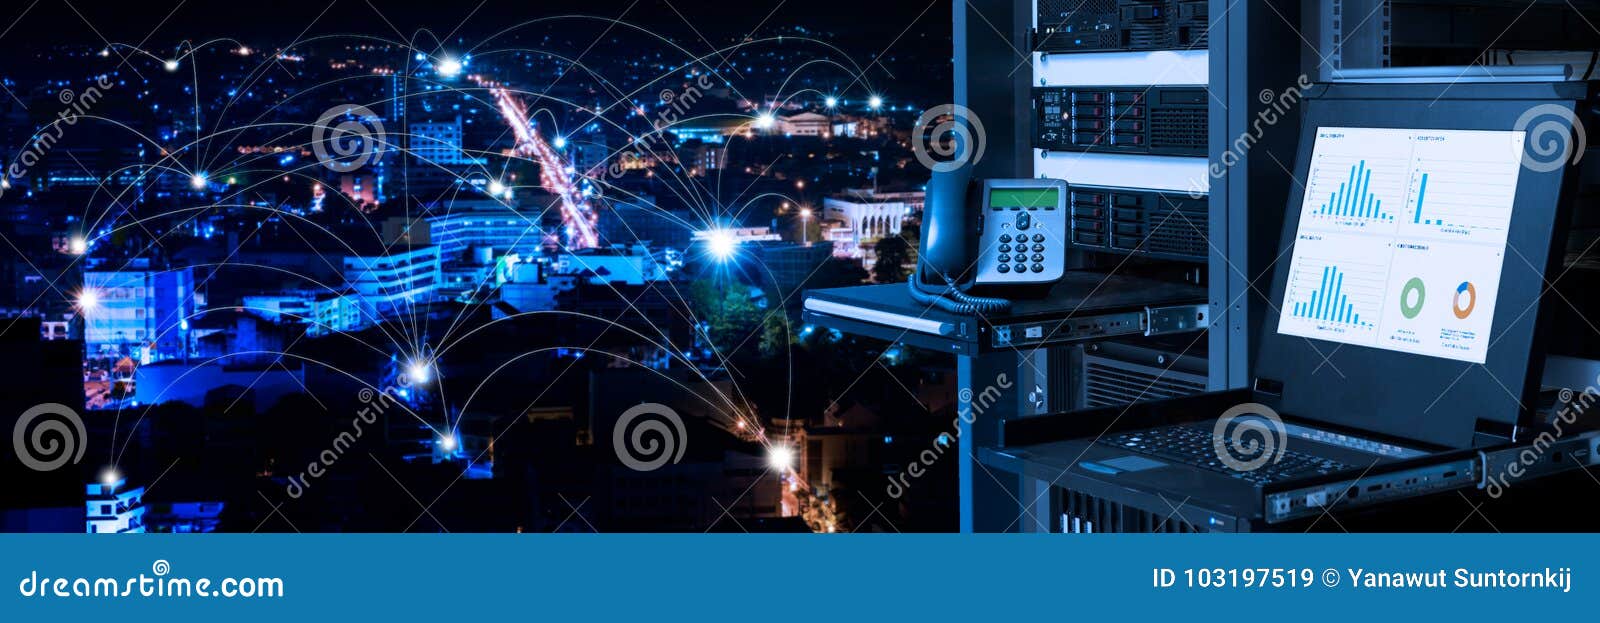 management and monitoring monitor in data center and connectivity lines over night city background